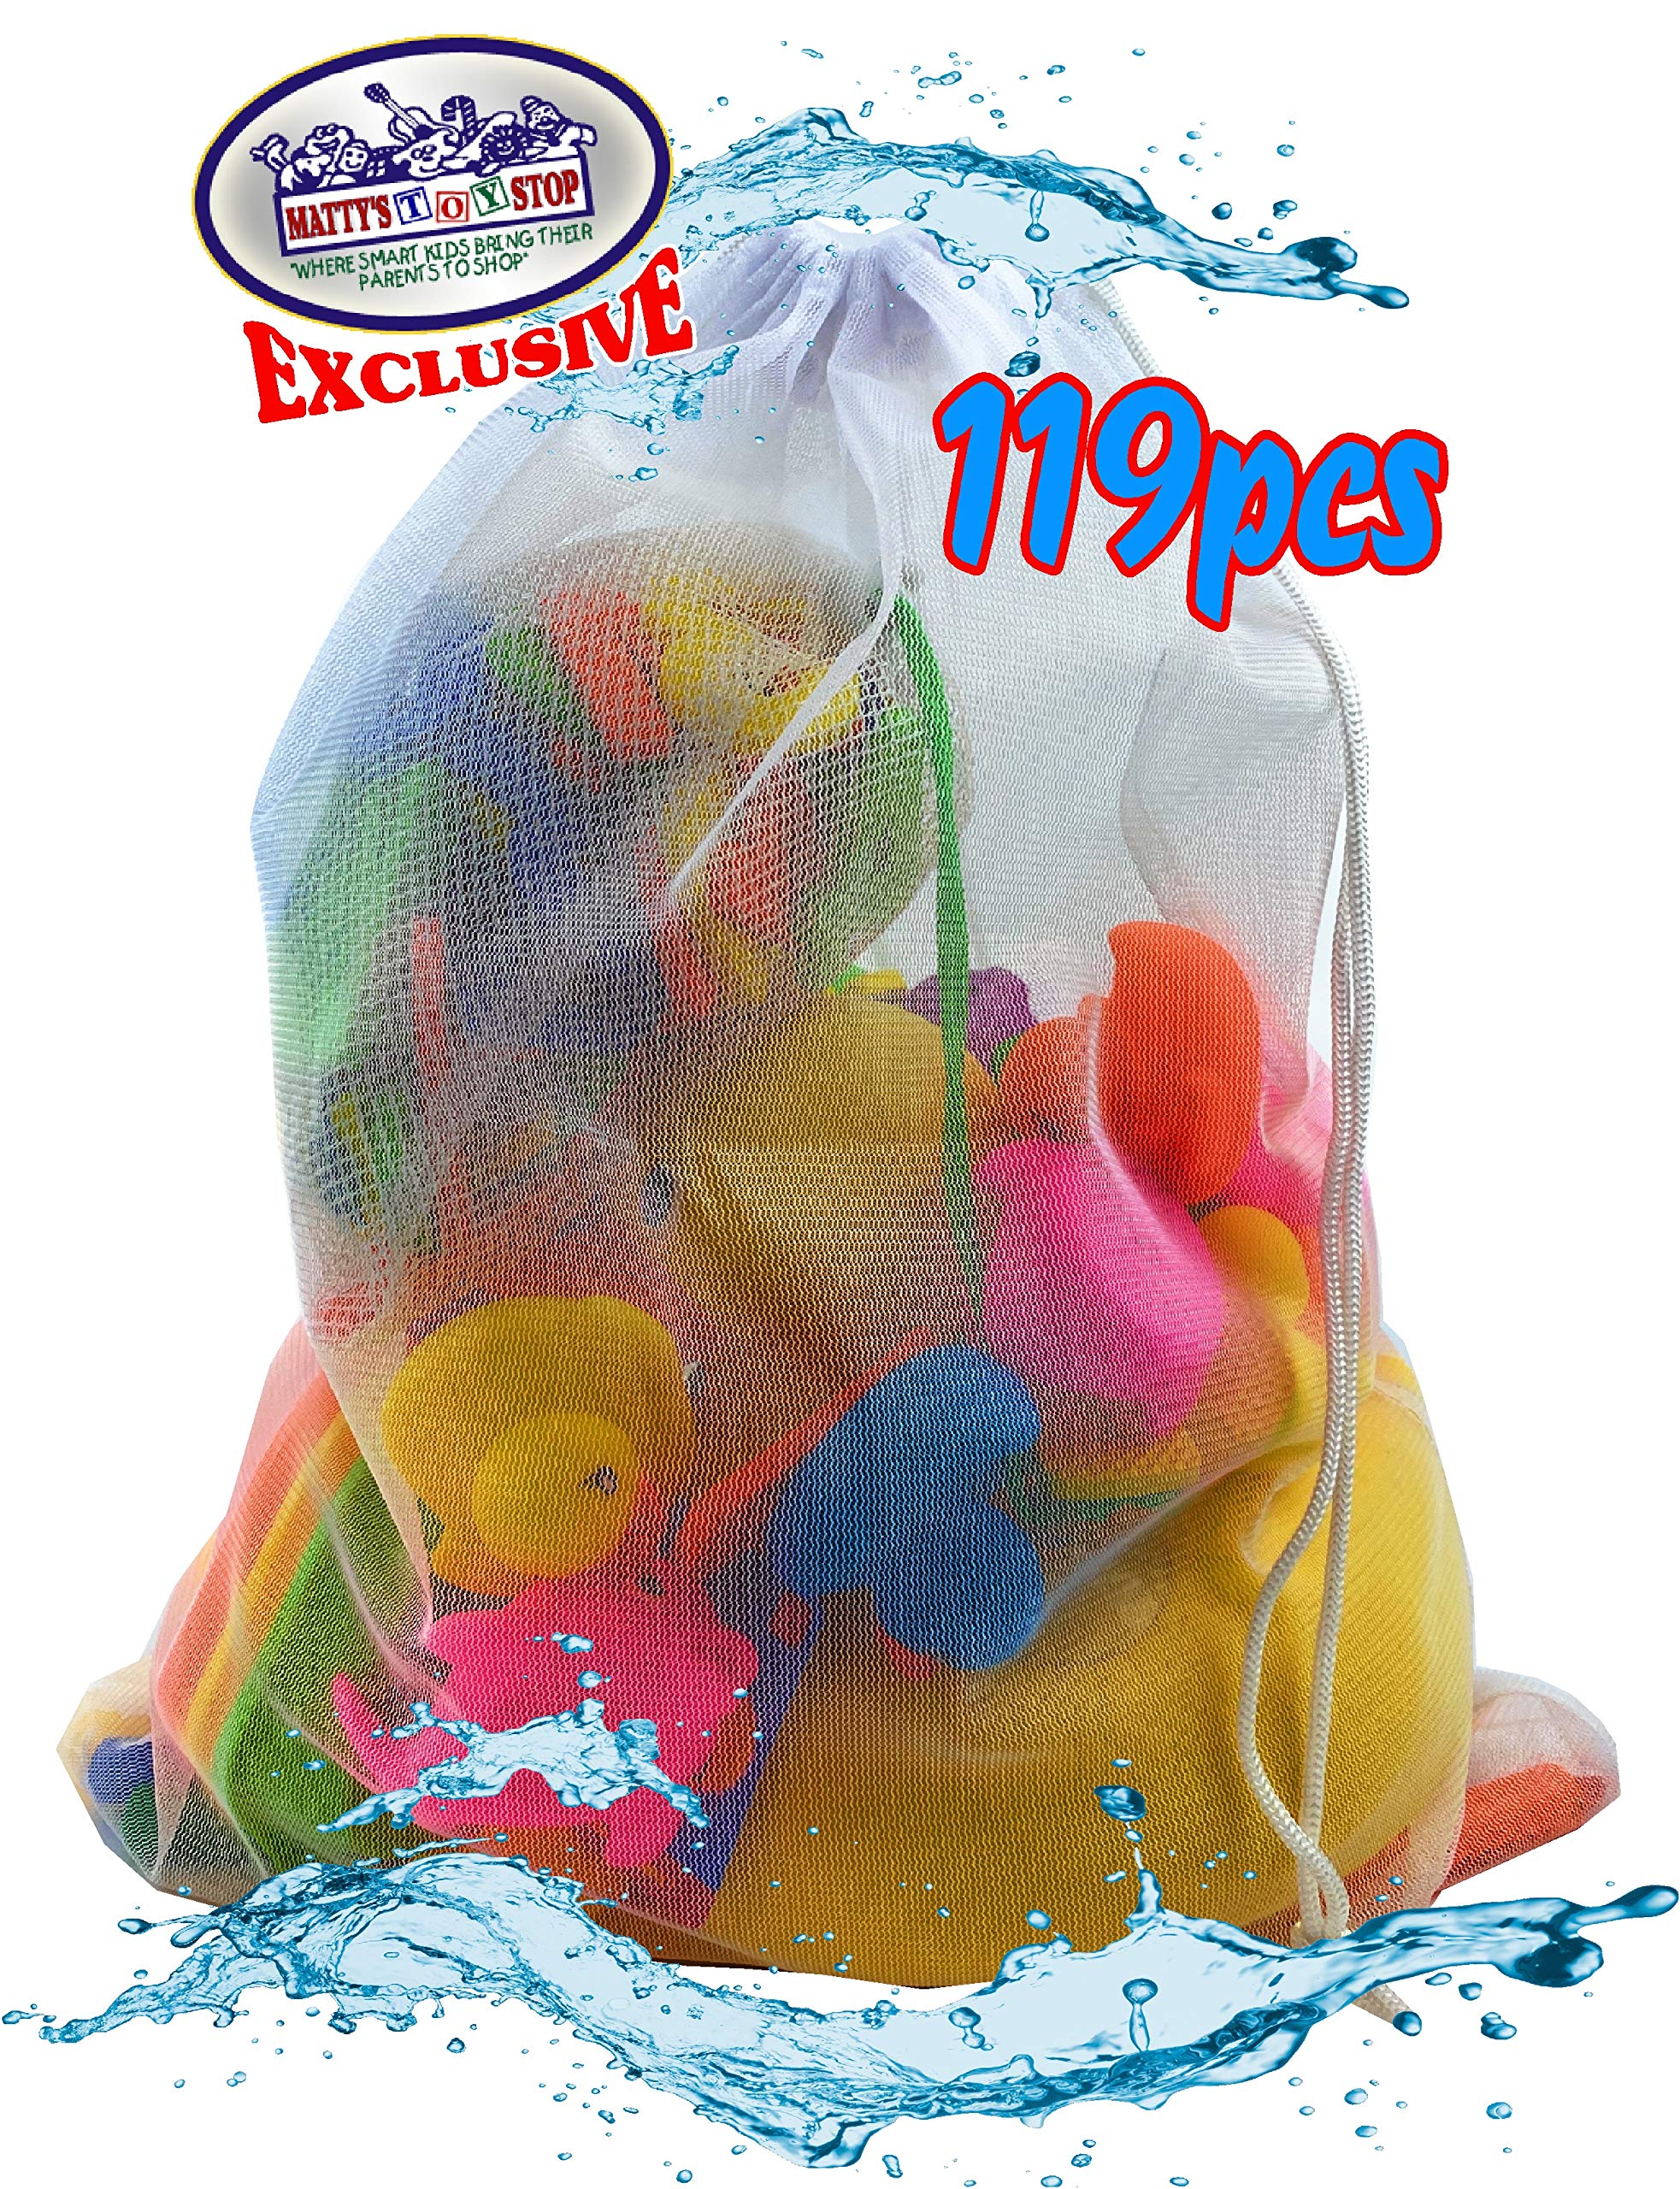 Mɑtty's Toy Stop 119pcs Ultimate Bath Toys Set Featuring Giant Rubber Duck, Bath Stickers, Mirrors, Crayons, Sponge, Mini Animals, Medium Animals, Stacking Boats, Foam Letters, Numbers & Storage Bag